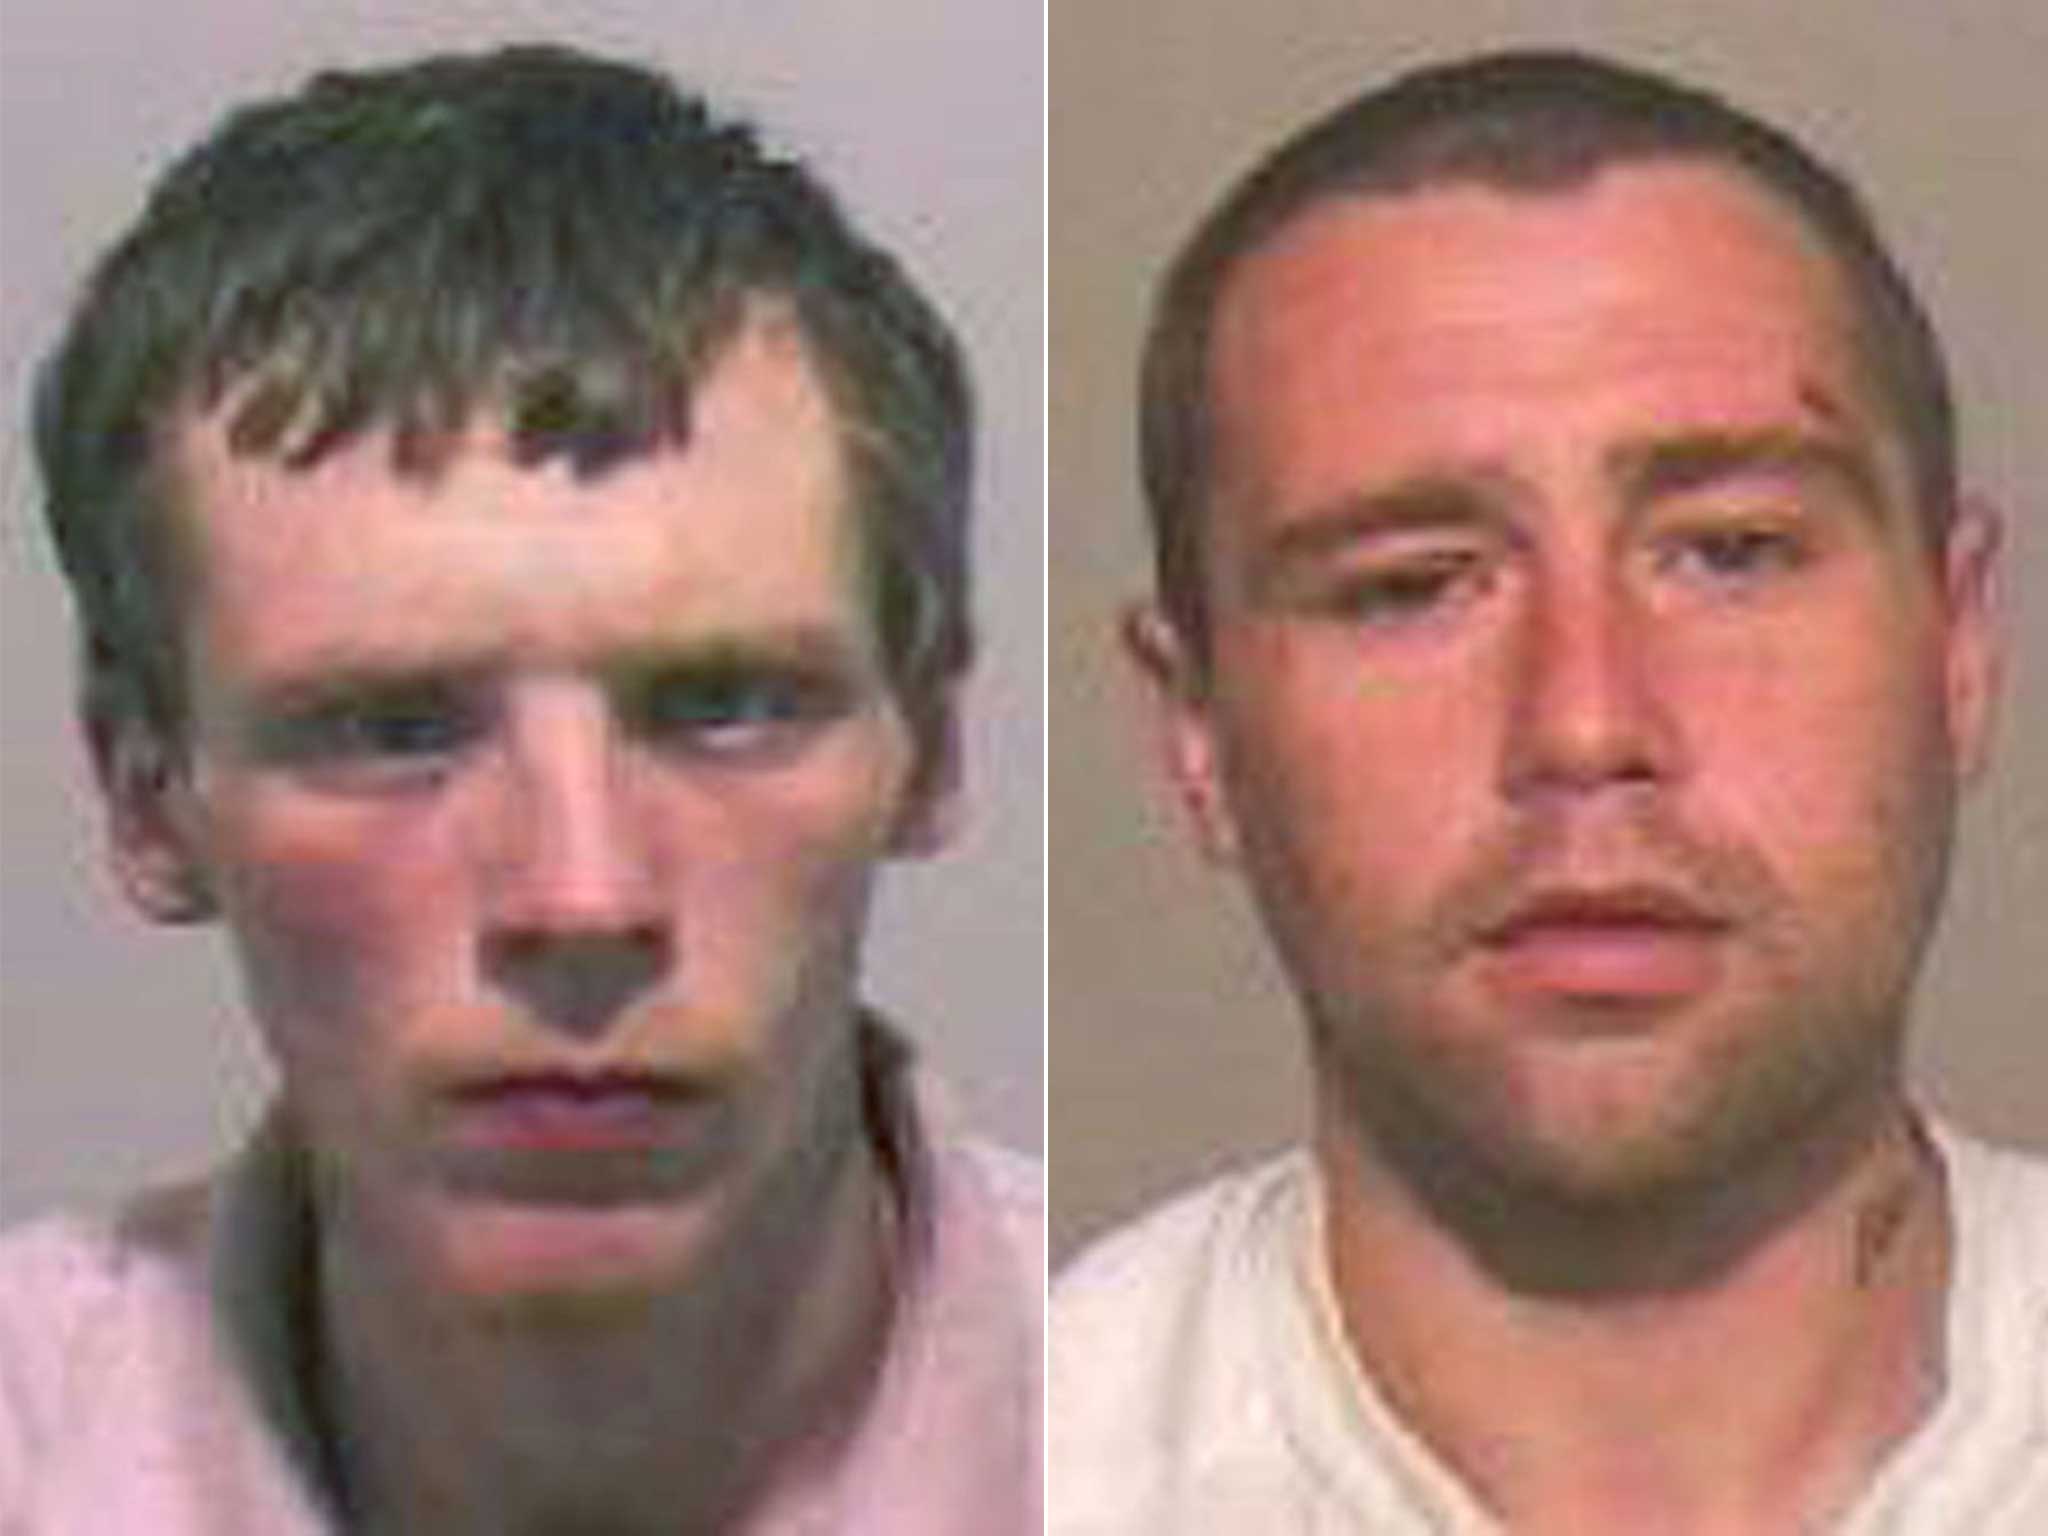 Scott Stephenson (left) and Dale Walker (right) have been sentenced